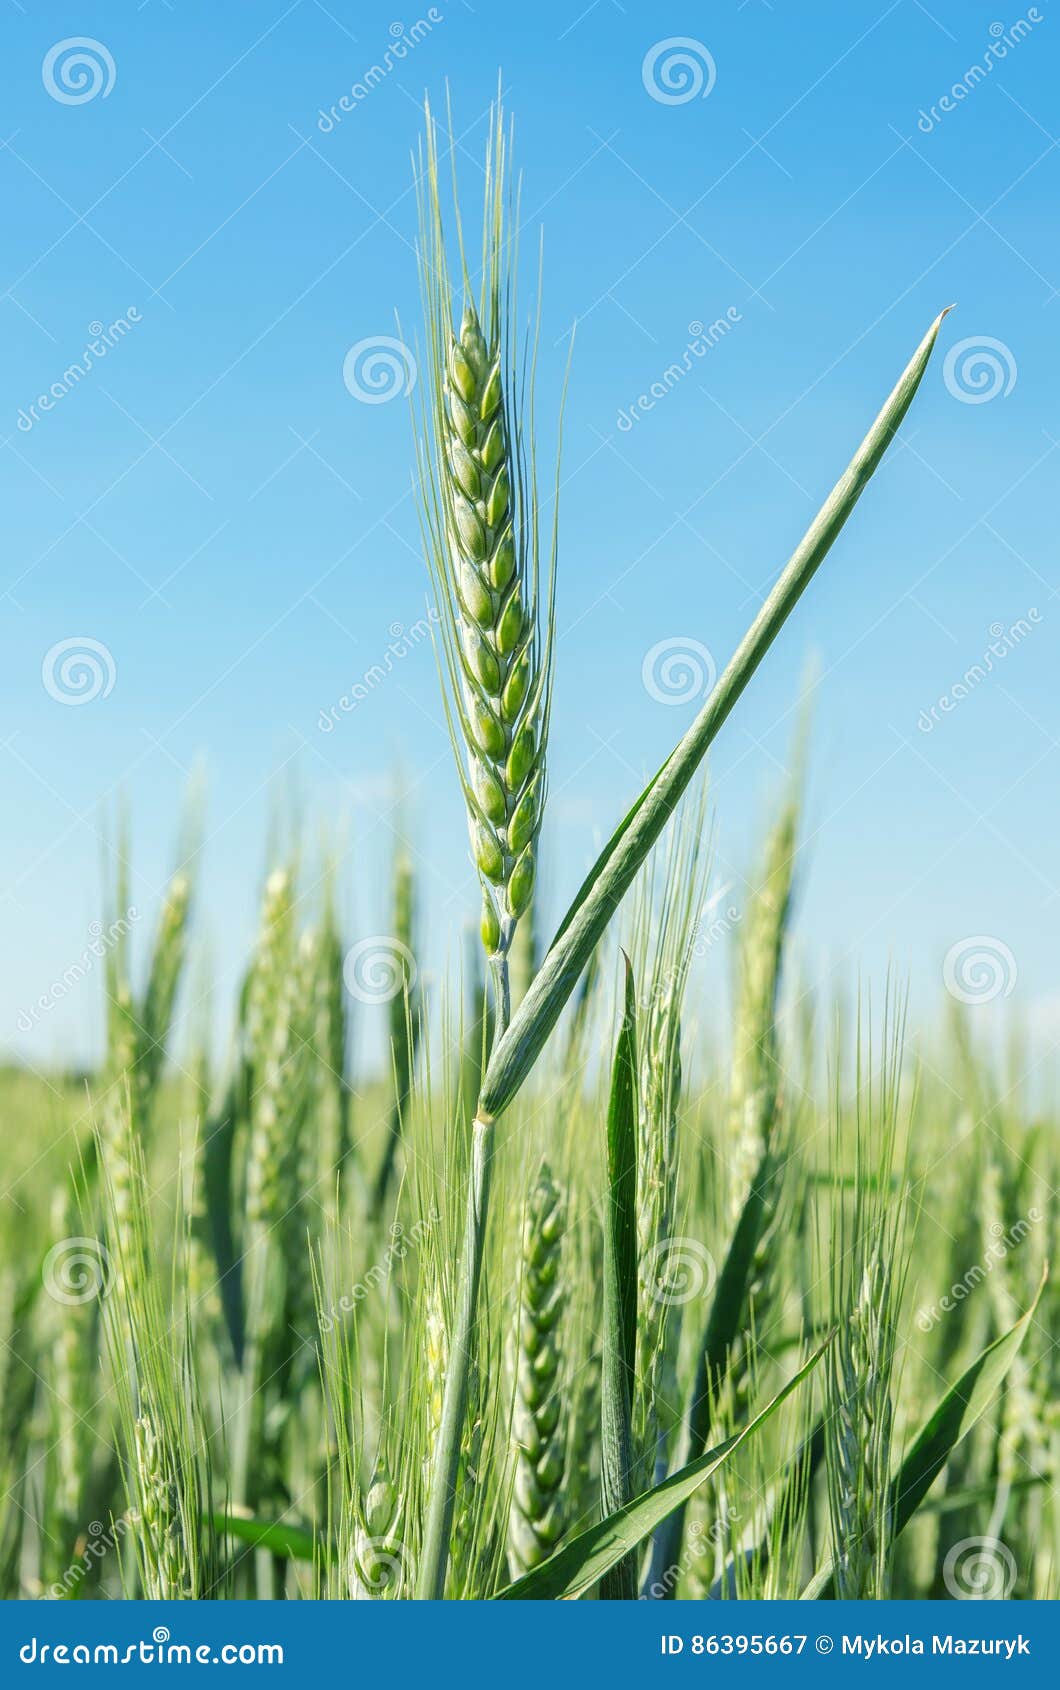 green spica of wheat